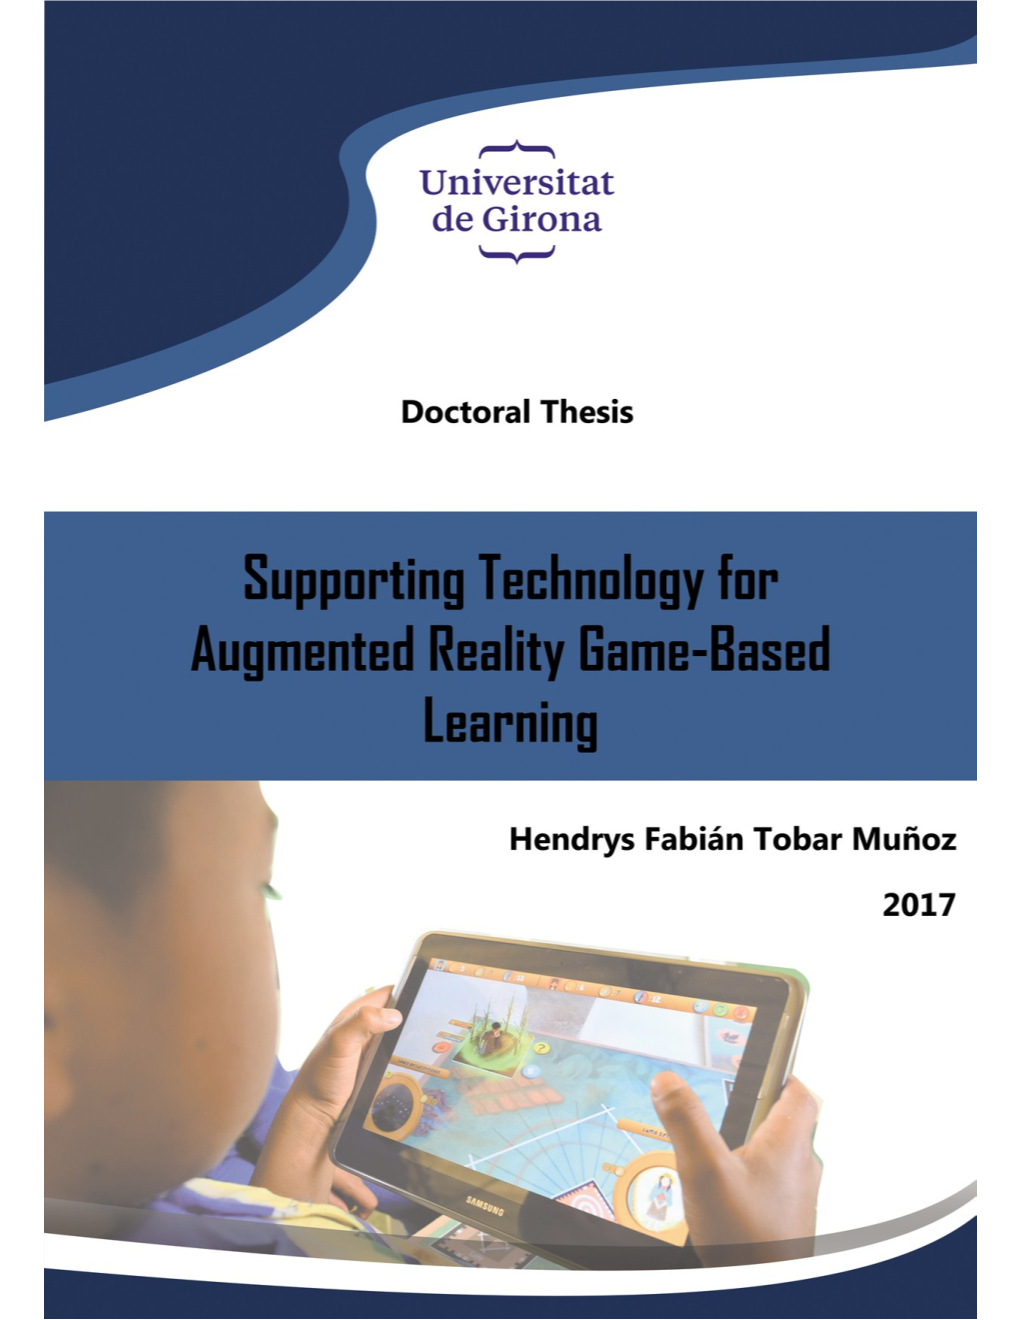 Supporting Technology for Augmented Reality Game-Based Learning